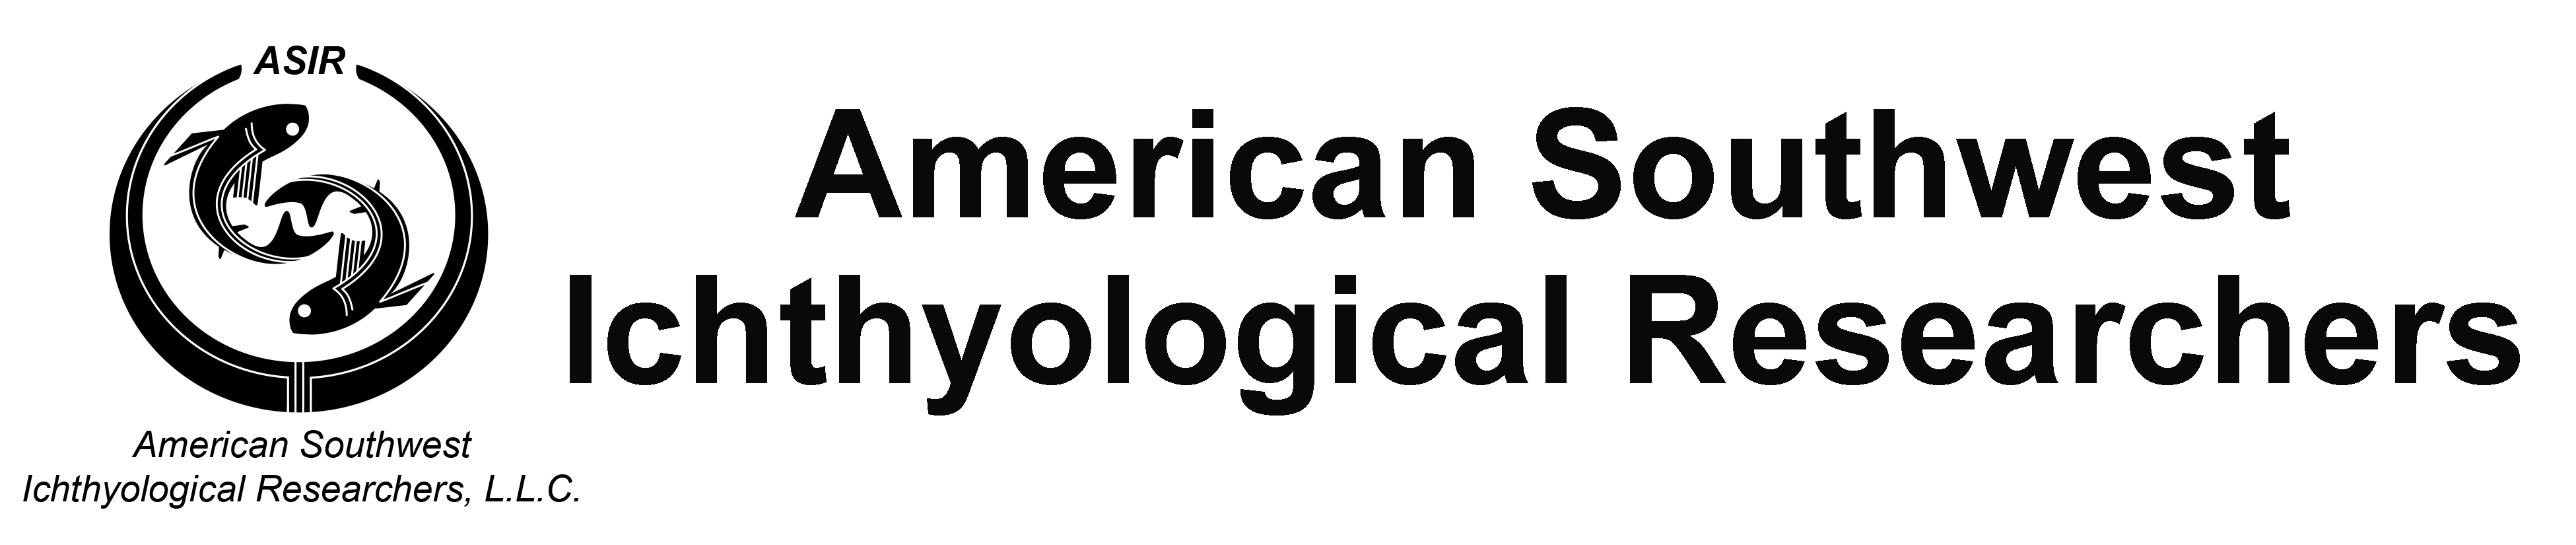 American Southwest Ichthyological Researchers